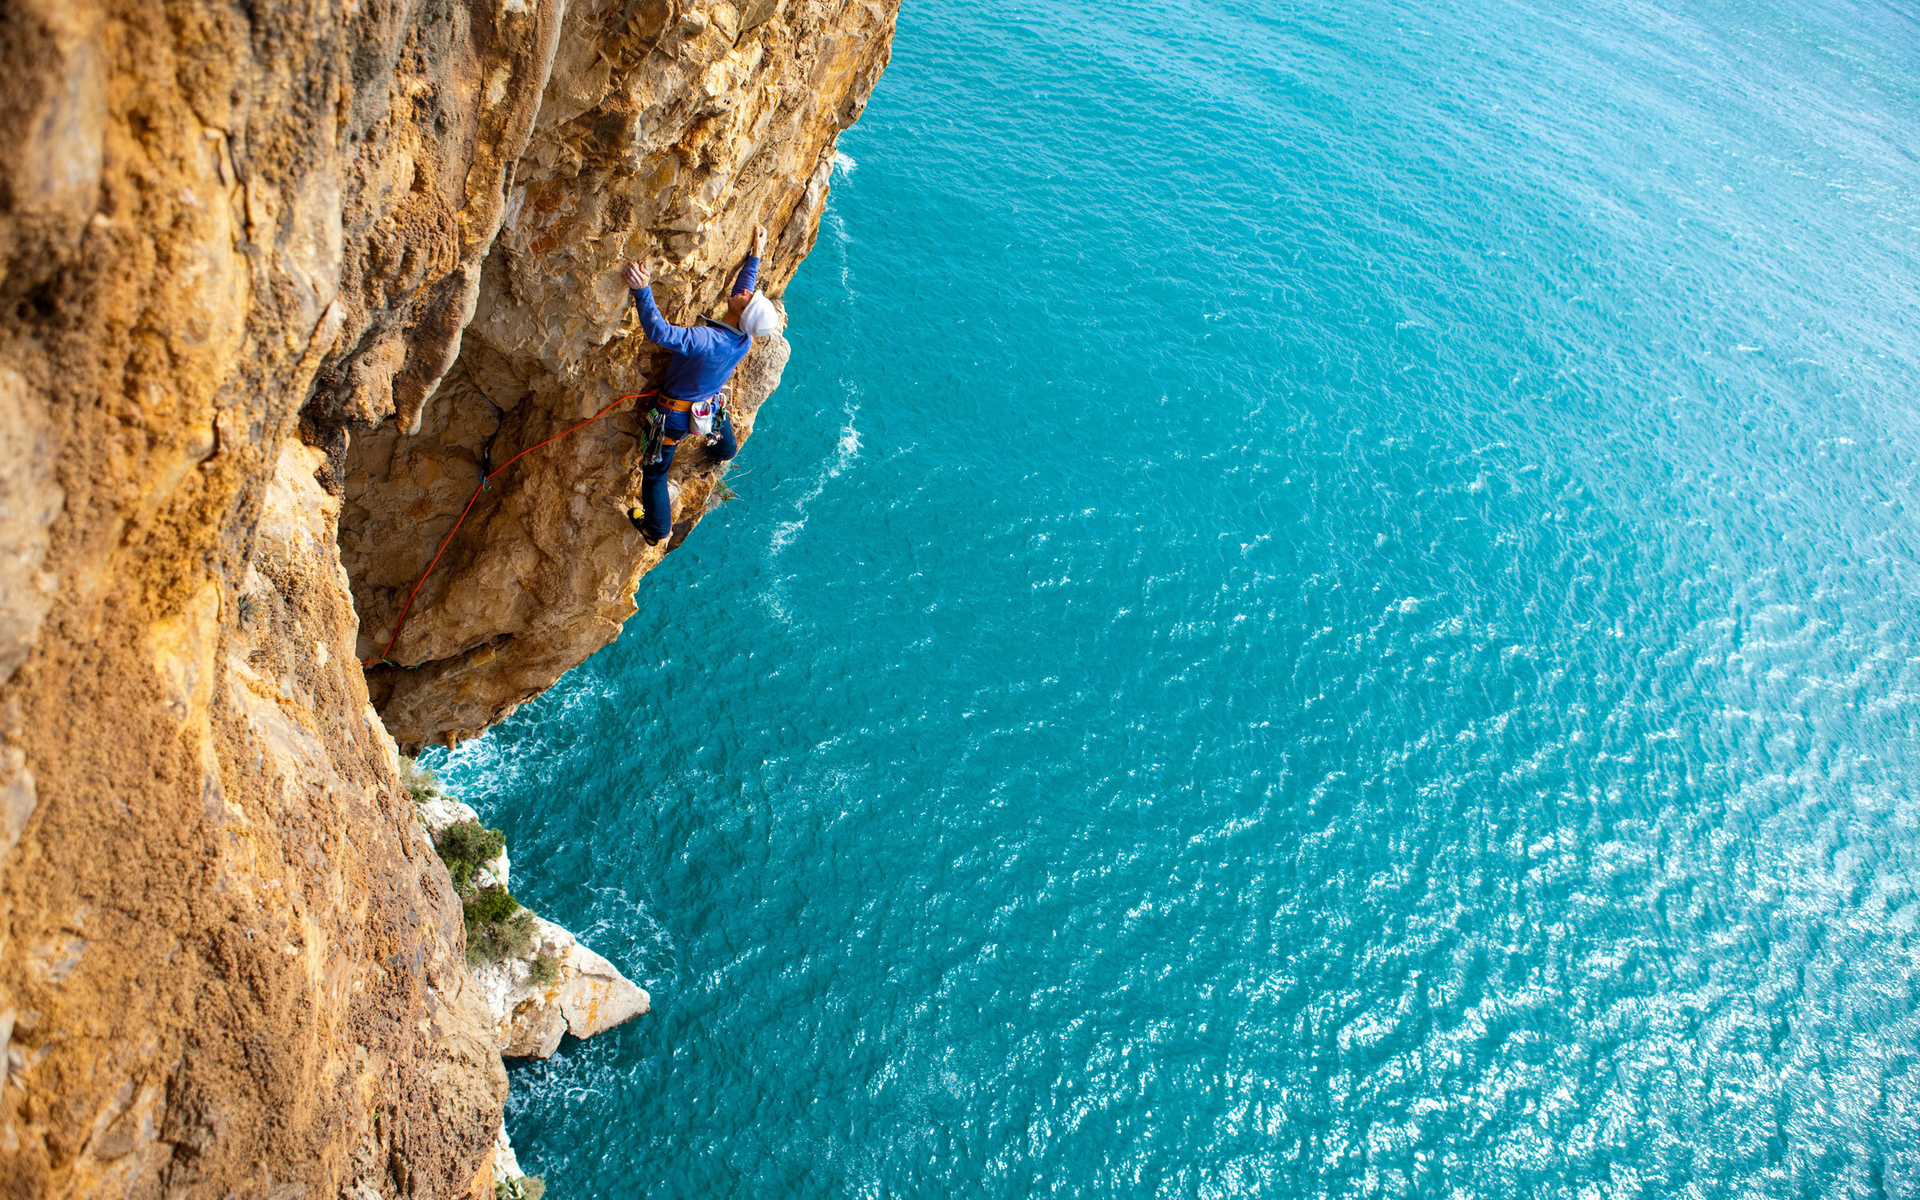 climbing, Sports, Nature, Rope, Man, Men, Males, Cliff, Mountains, Ocean, Sea, Water, Sparkle Wallpaper